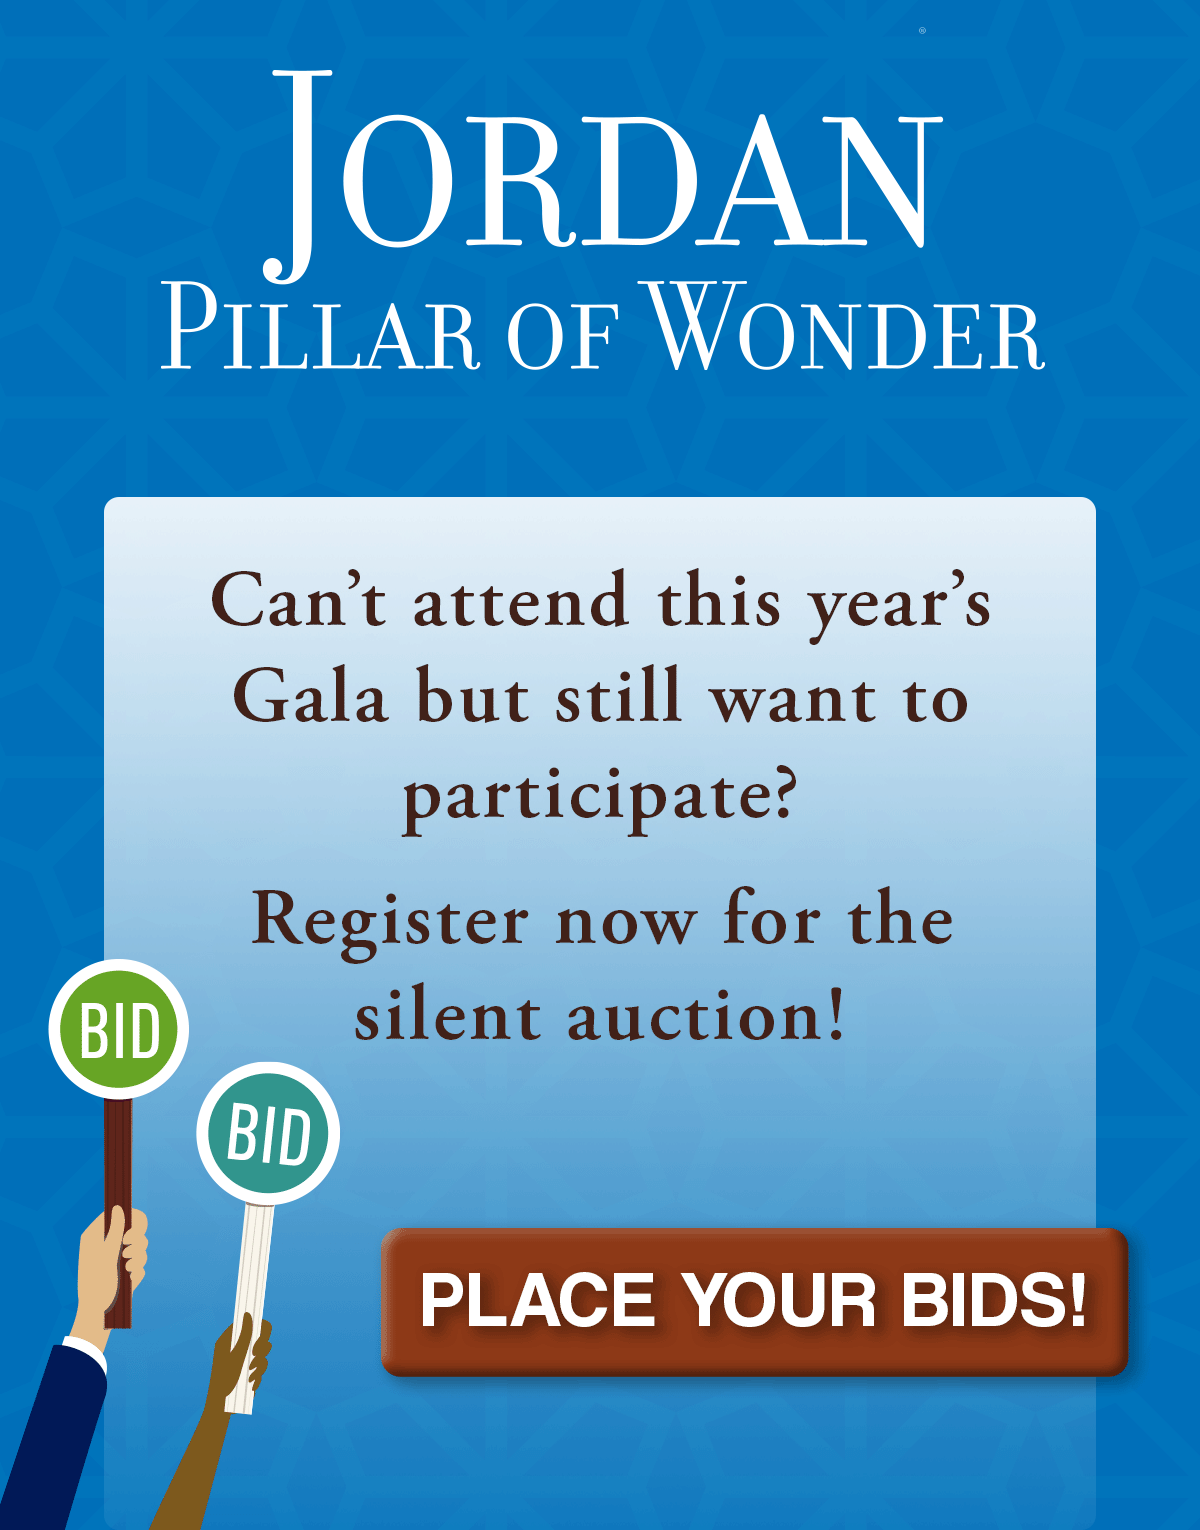 Place your bids! Can't attend this year's Gala but still want to participate? Click and register now for the silent auction.